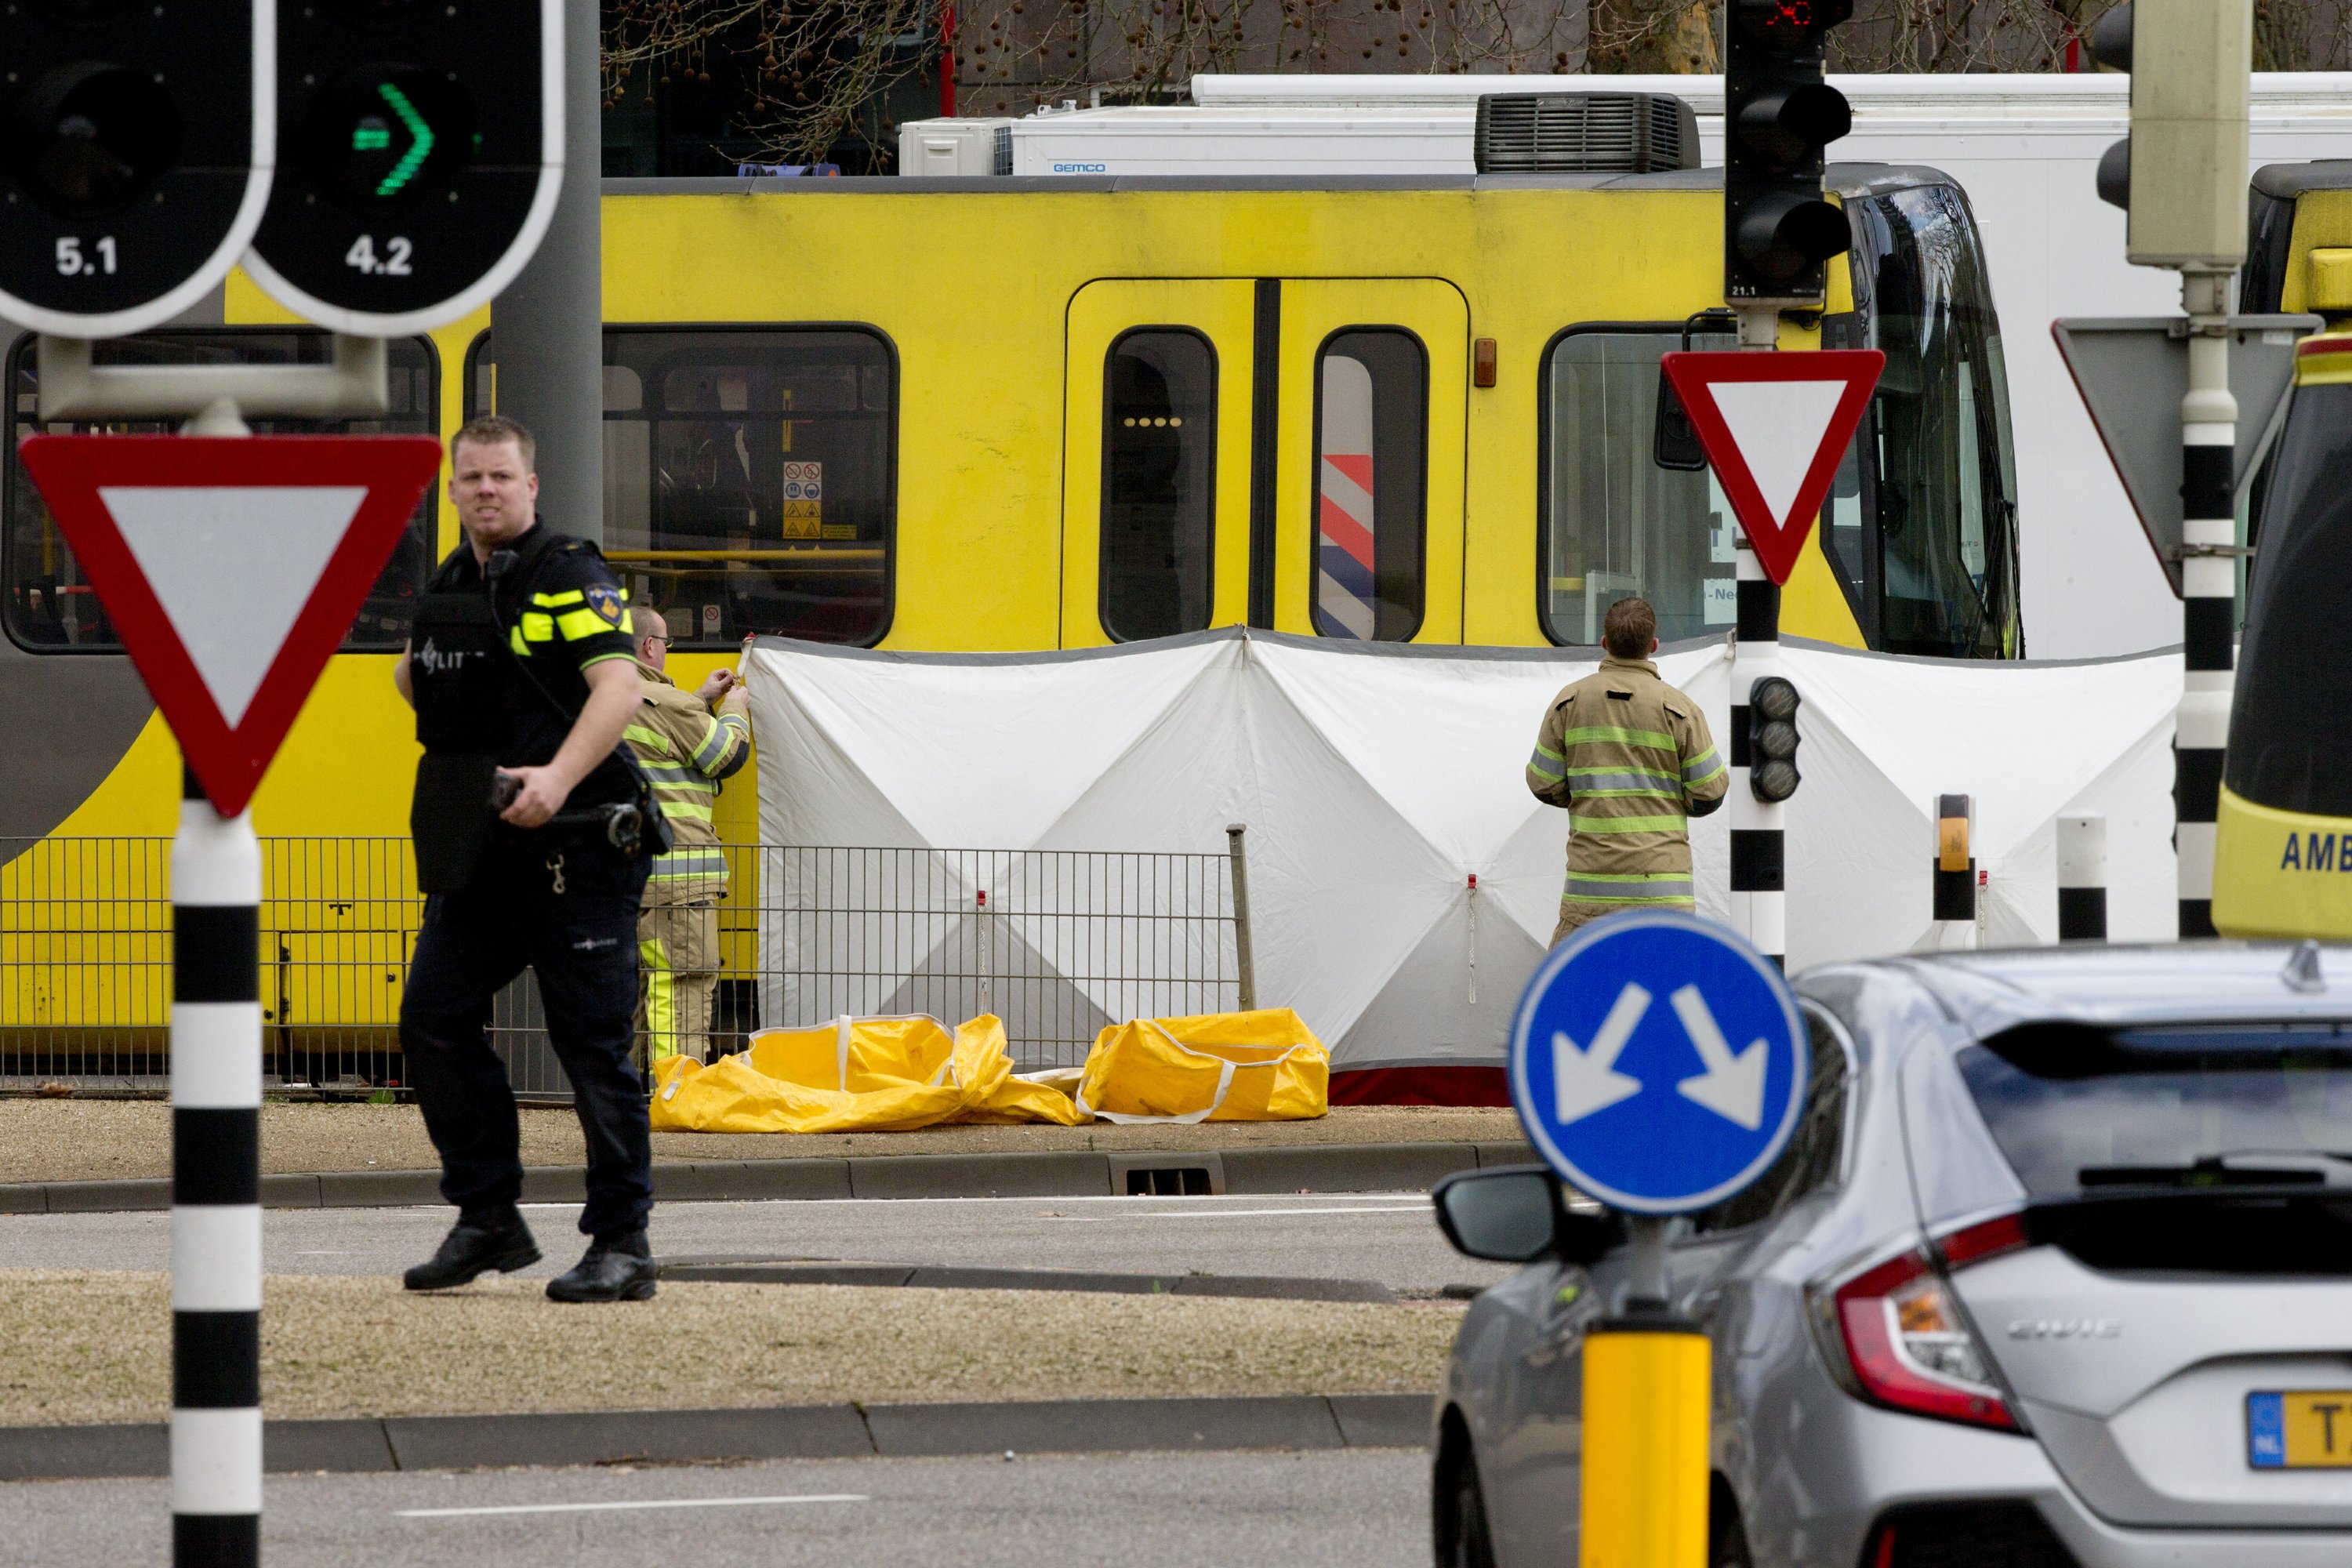 Rescue workers install a screen on the spot where a body was covered with a white blanket following a shooting in Utrecht, Netherlands, Monday, March 18, 2019. Police in the central Dutch city of Utrecht say on Twitter that "multiple" people have been injured as a result of a shooting in a tram in a residential neighborhood. (AP Photo/Peter Dejong)